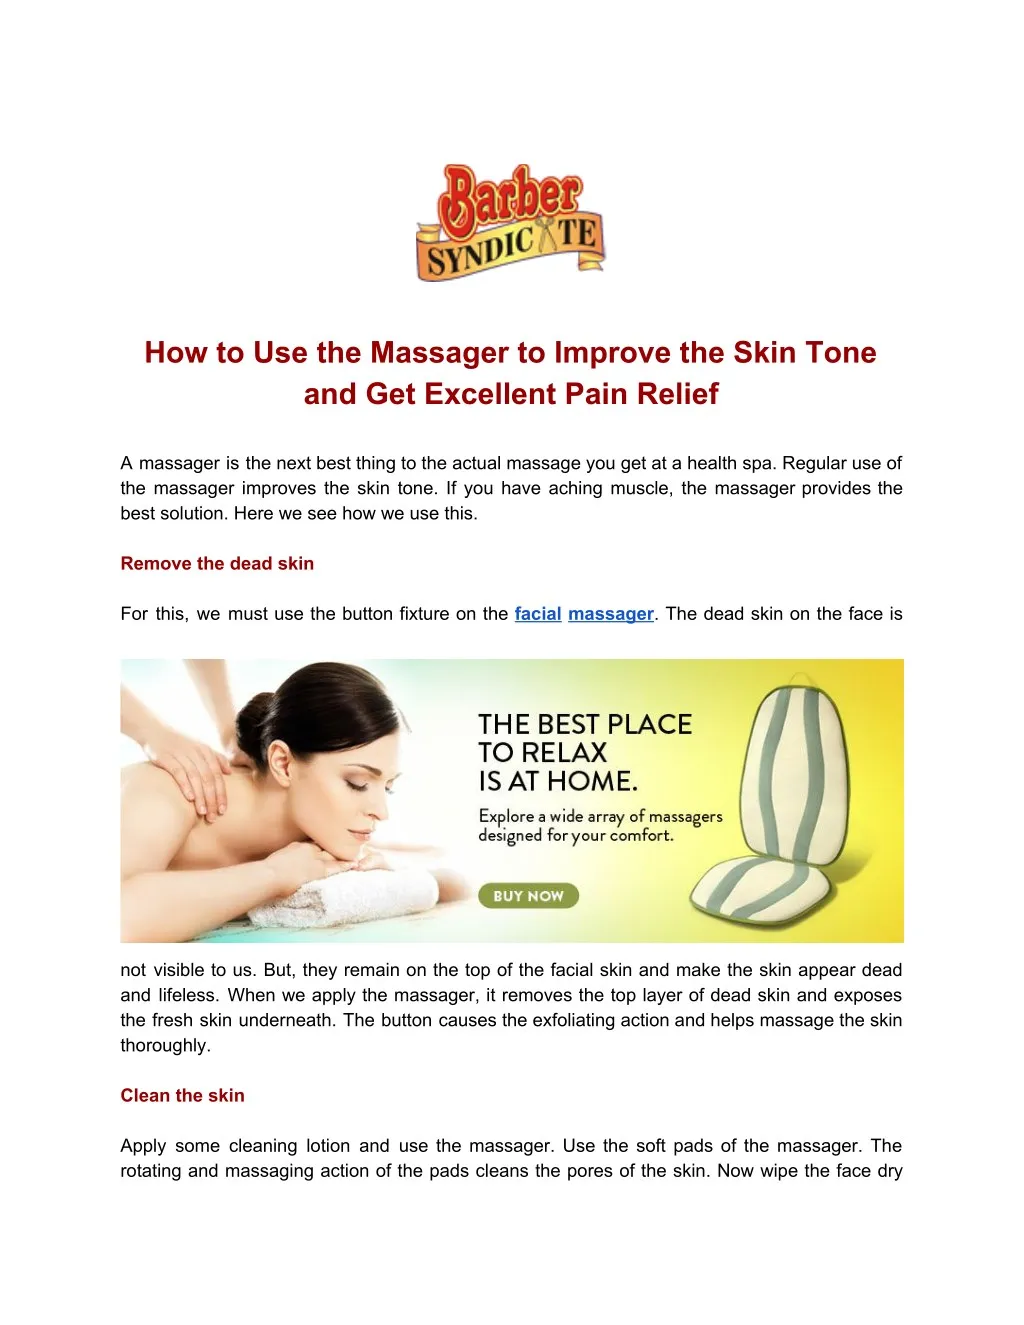 how to use the massager to improve the skin tone